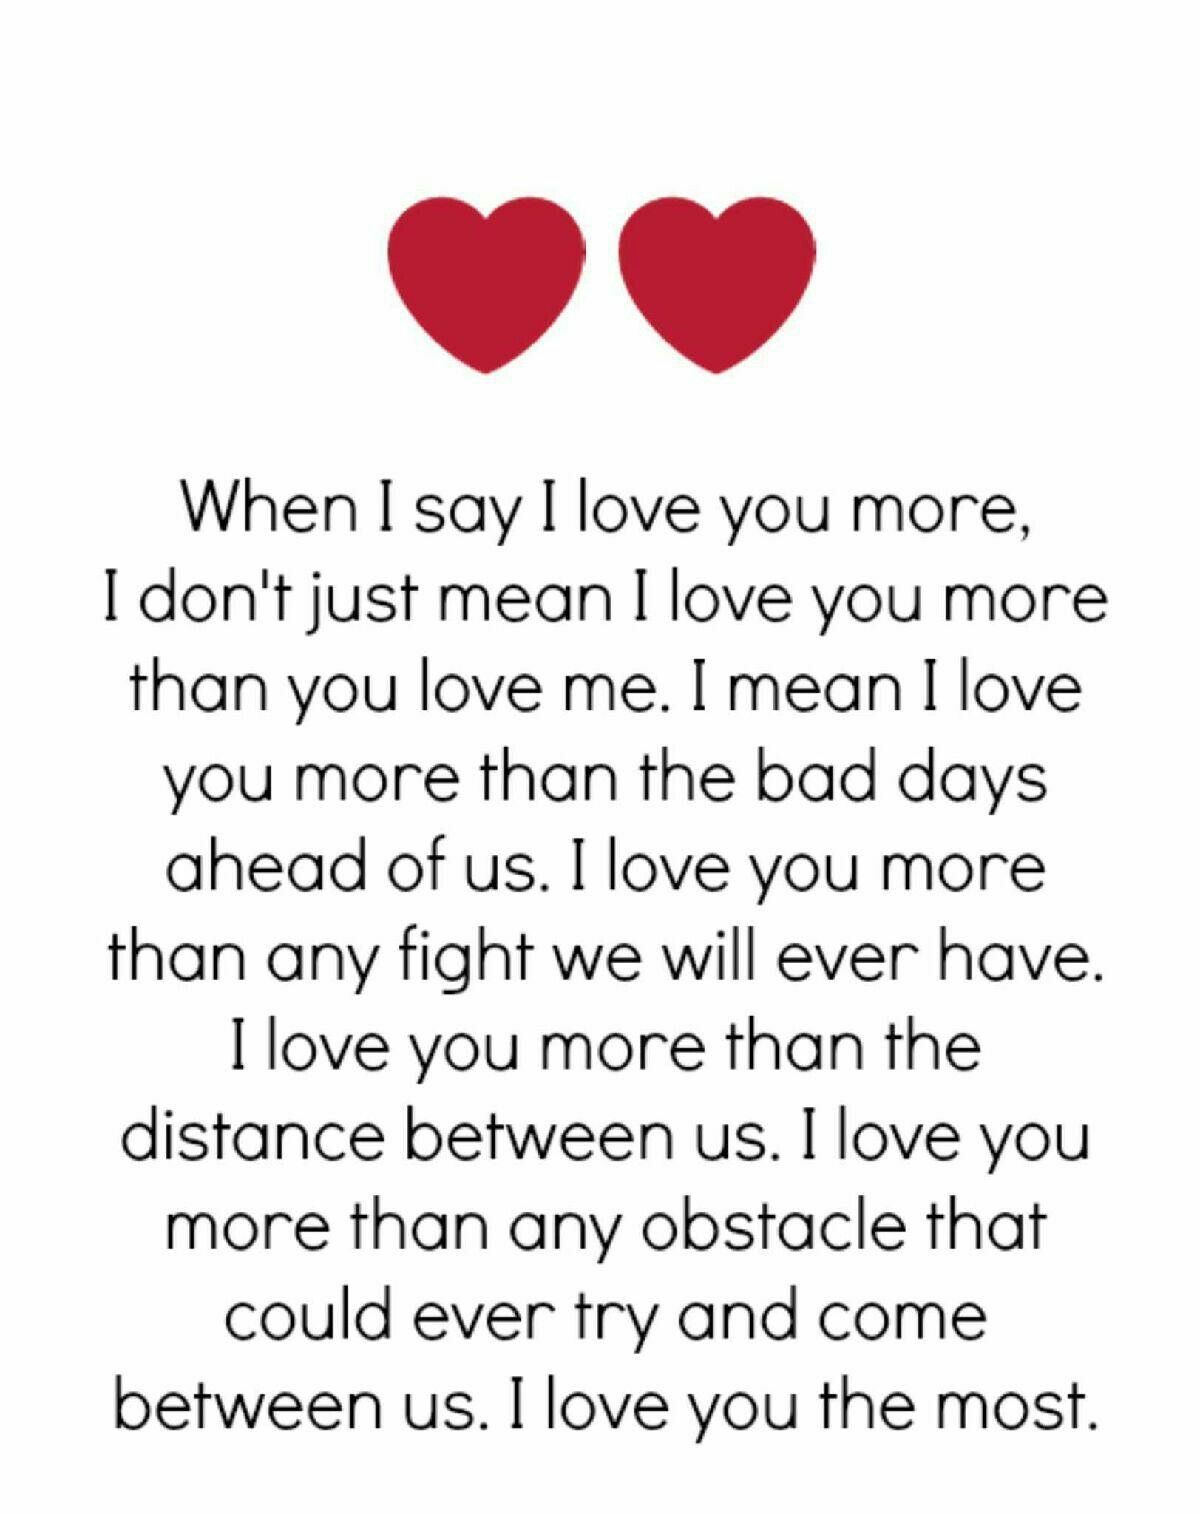 When I say I love you more.. Soulmate love quotes, Romantic